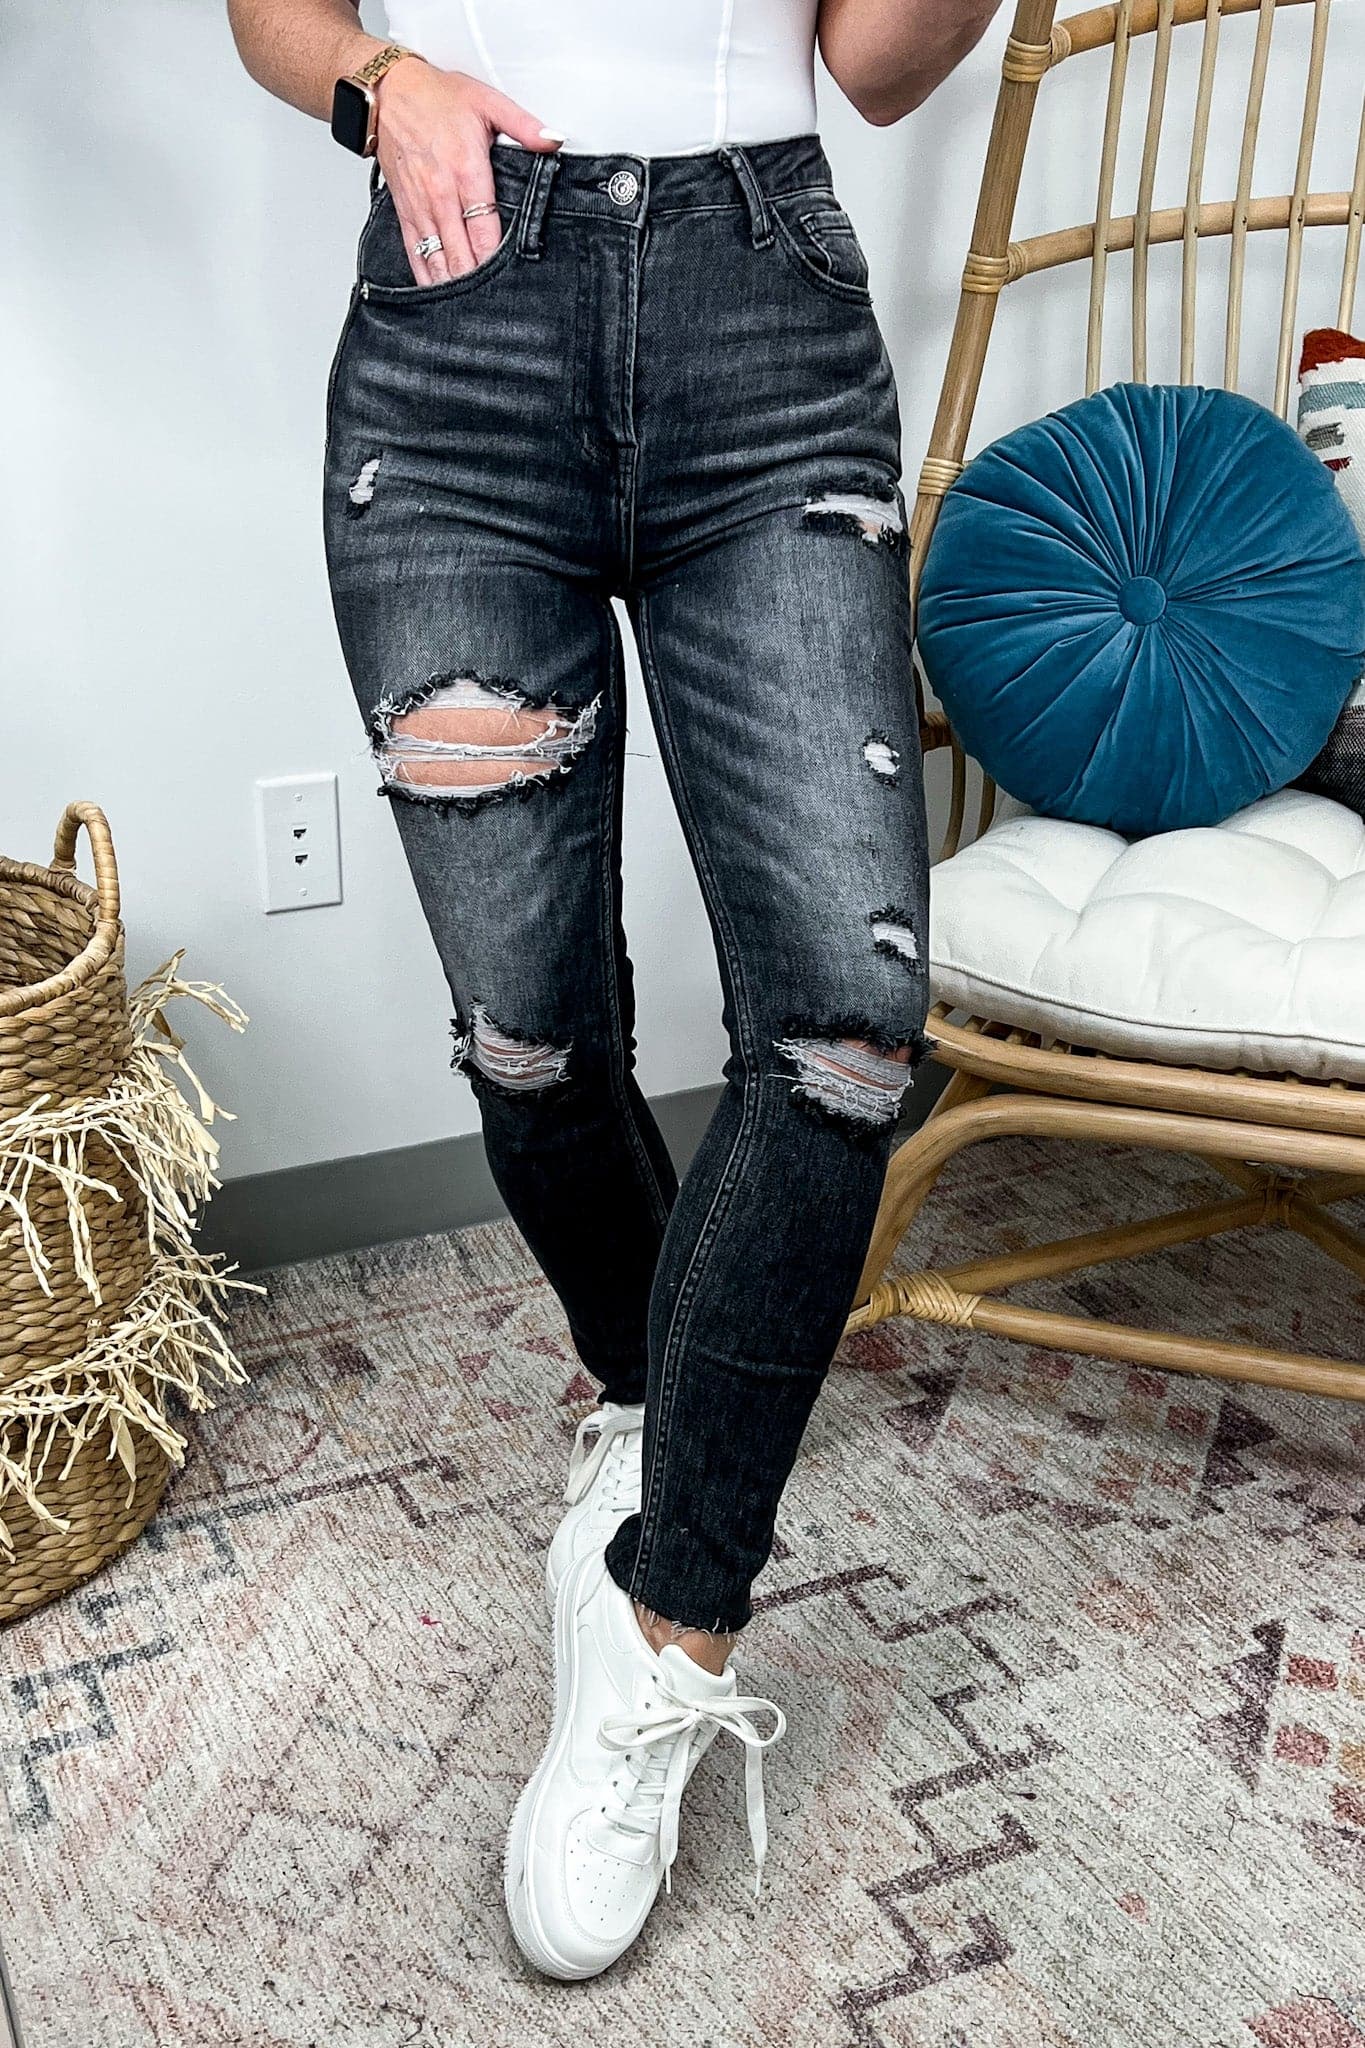  Rave High Rise Distressed Relaxed Skinny Jeans - Risen - Madison and Mallory